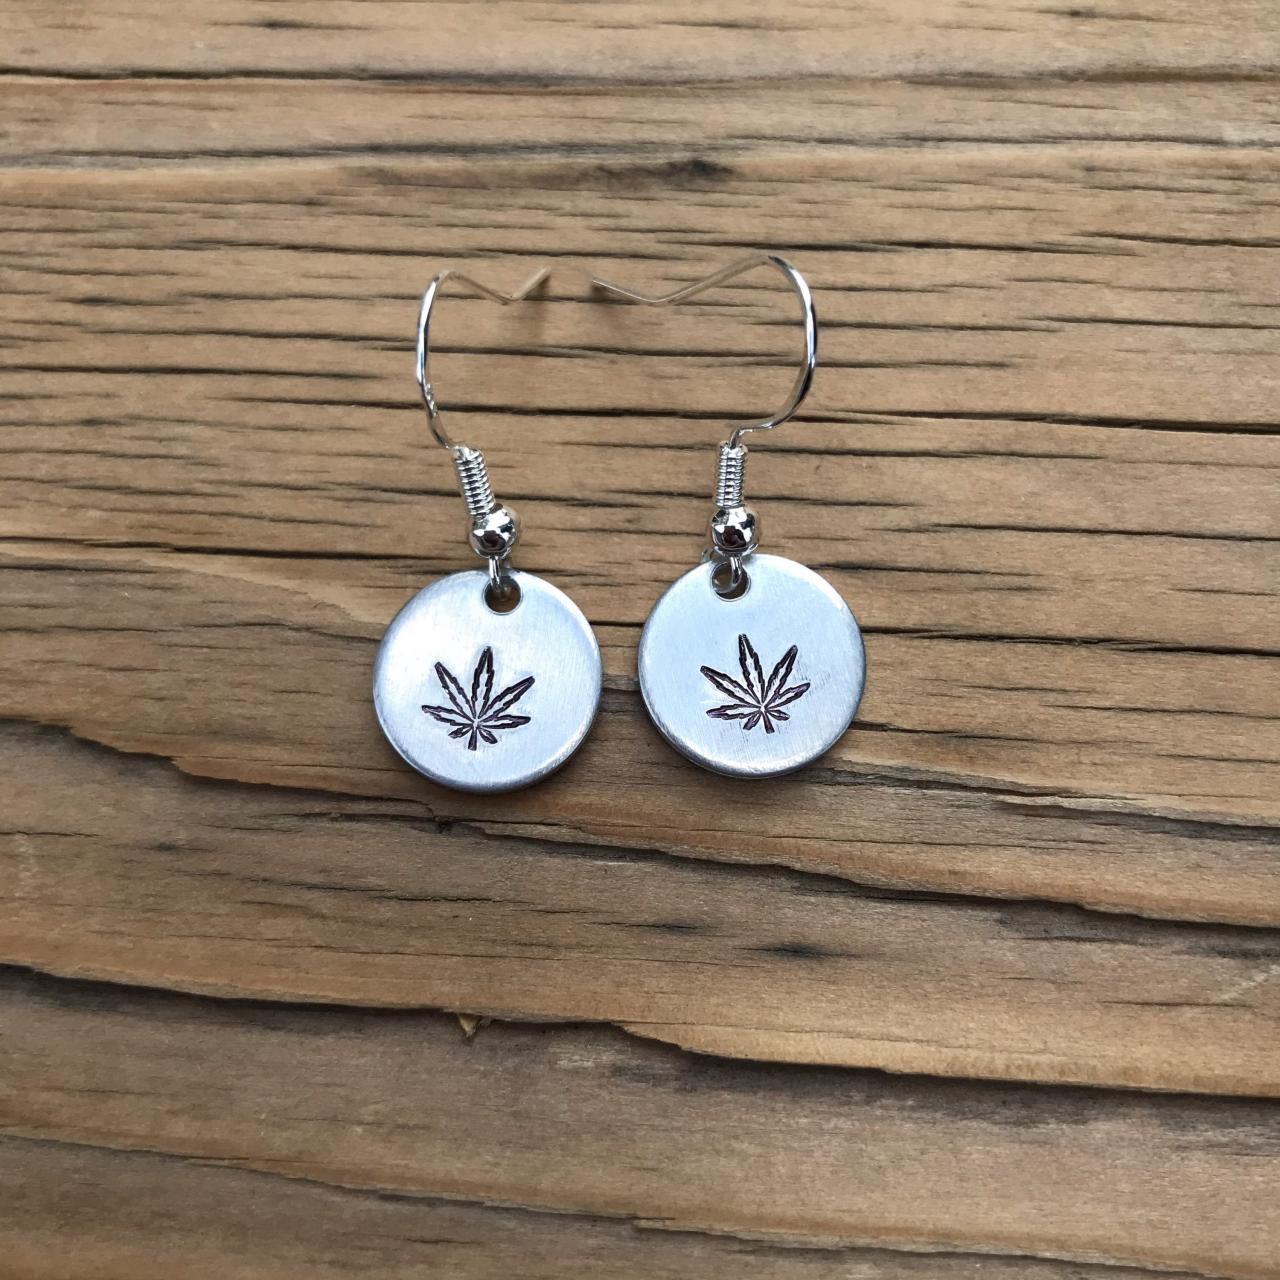 Pot Leaf Earrings, Silver Marijuana Earrings, Metal Stamped Jewelry, Hand Stamped Shop, Gift For Her, For Them, Stoner Present, Buds